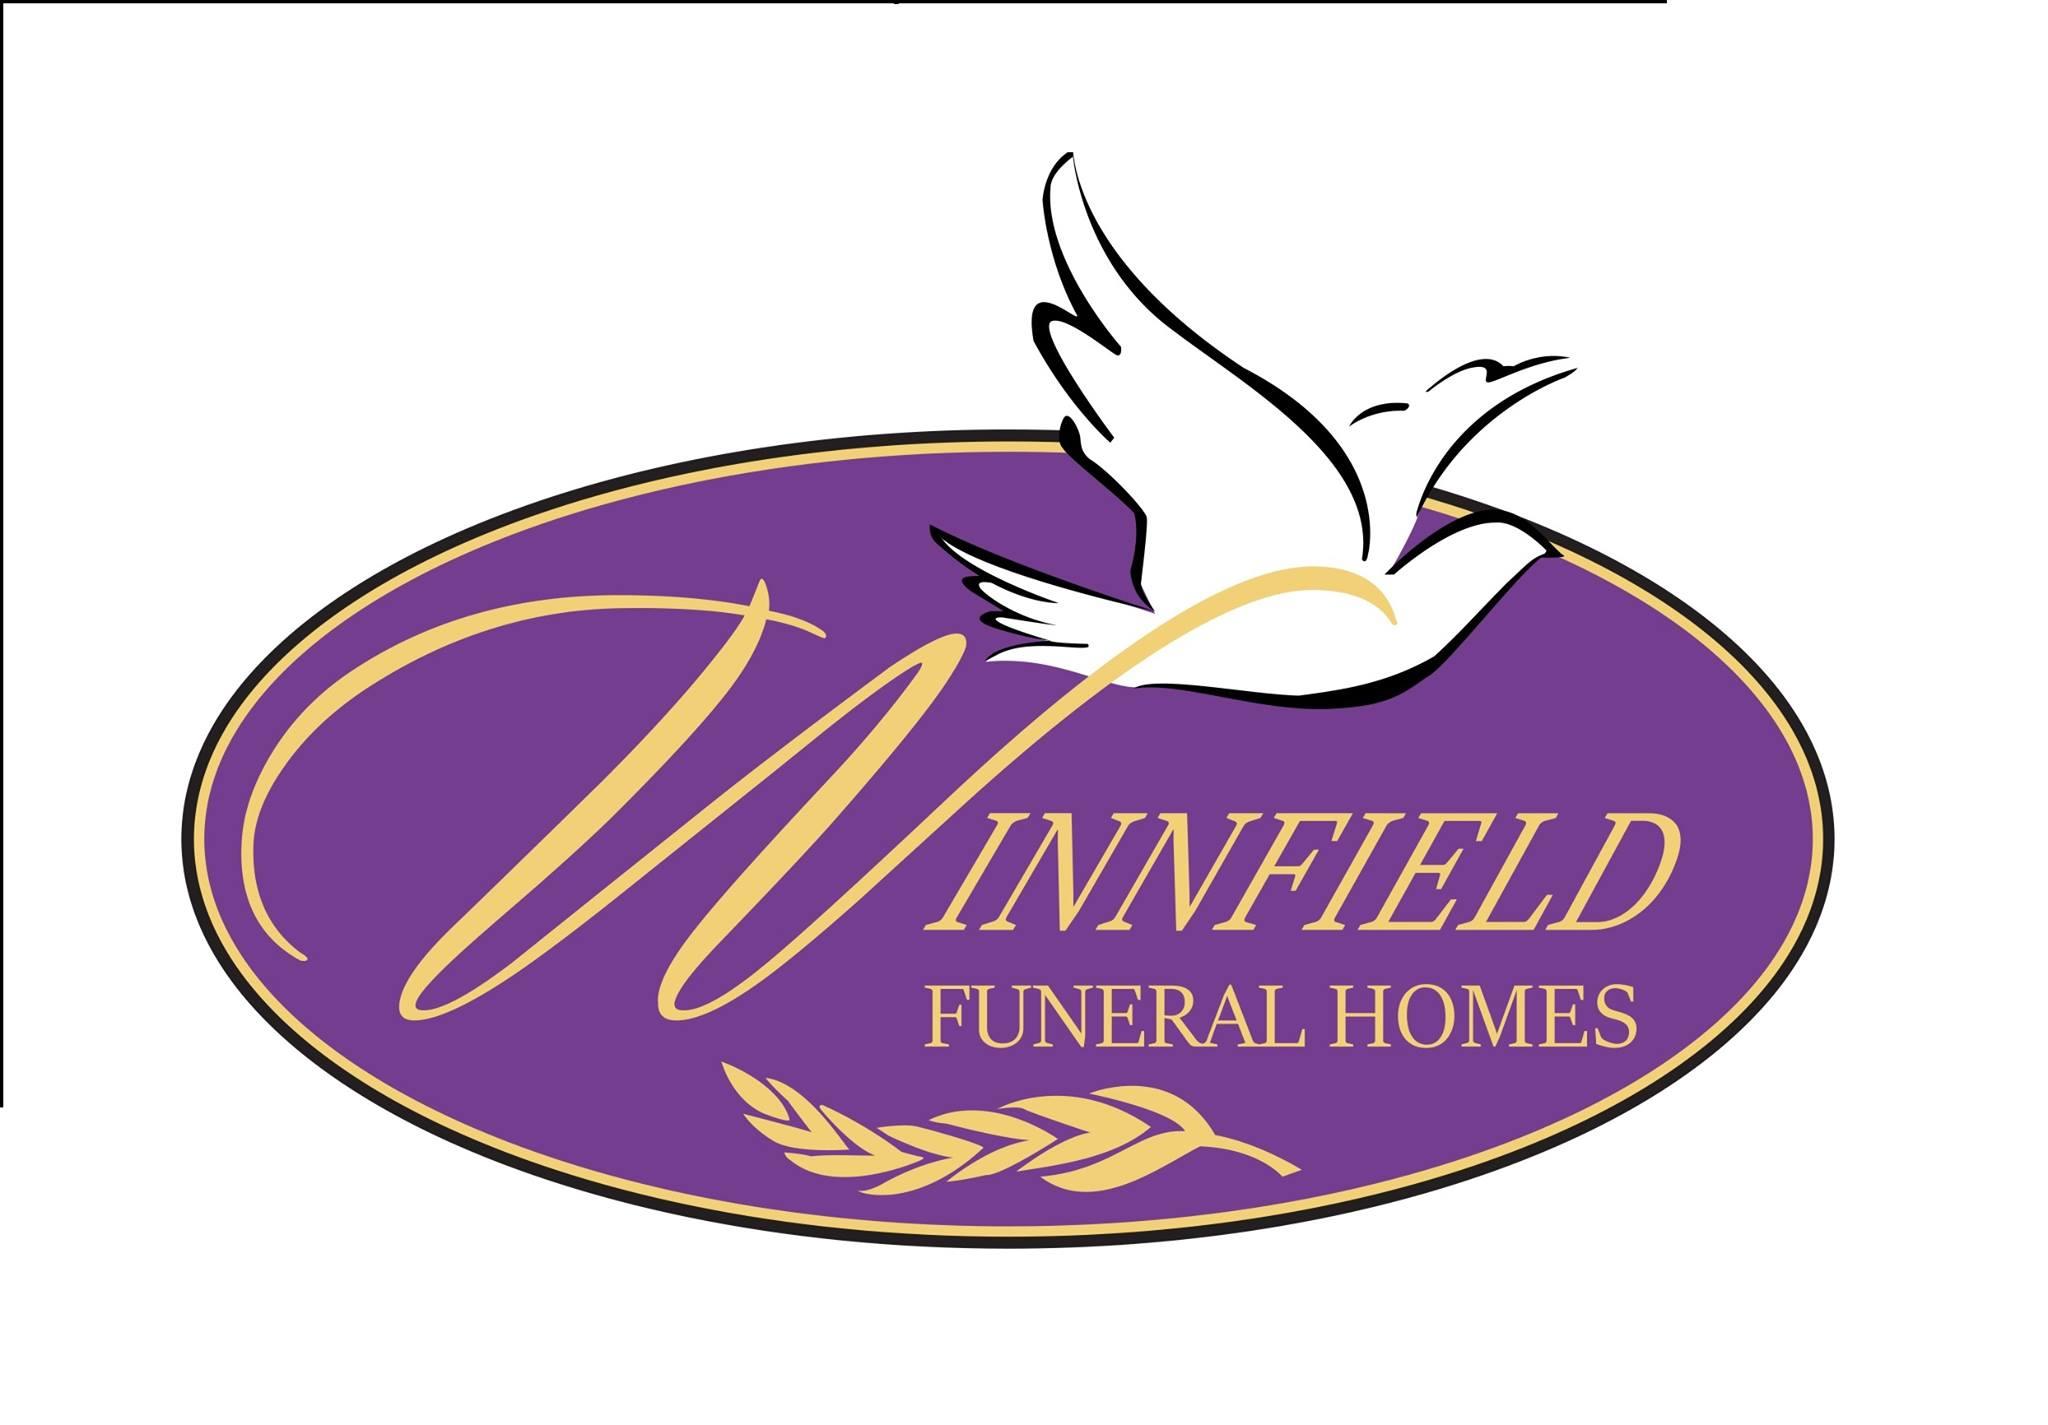 Winnfield funeral home natchitoches la